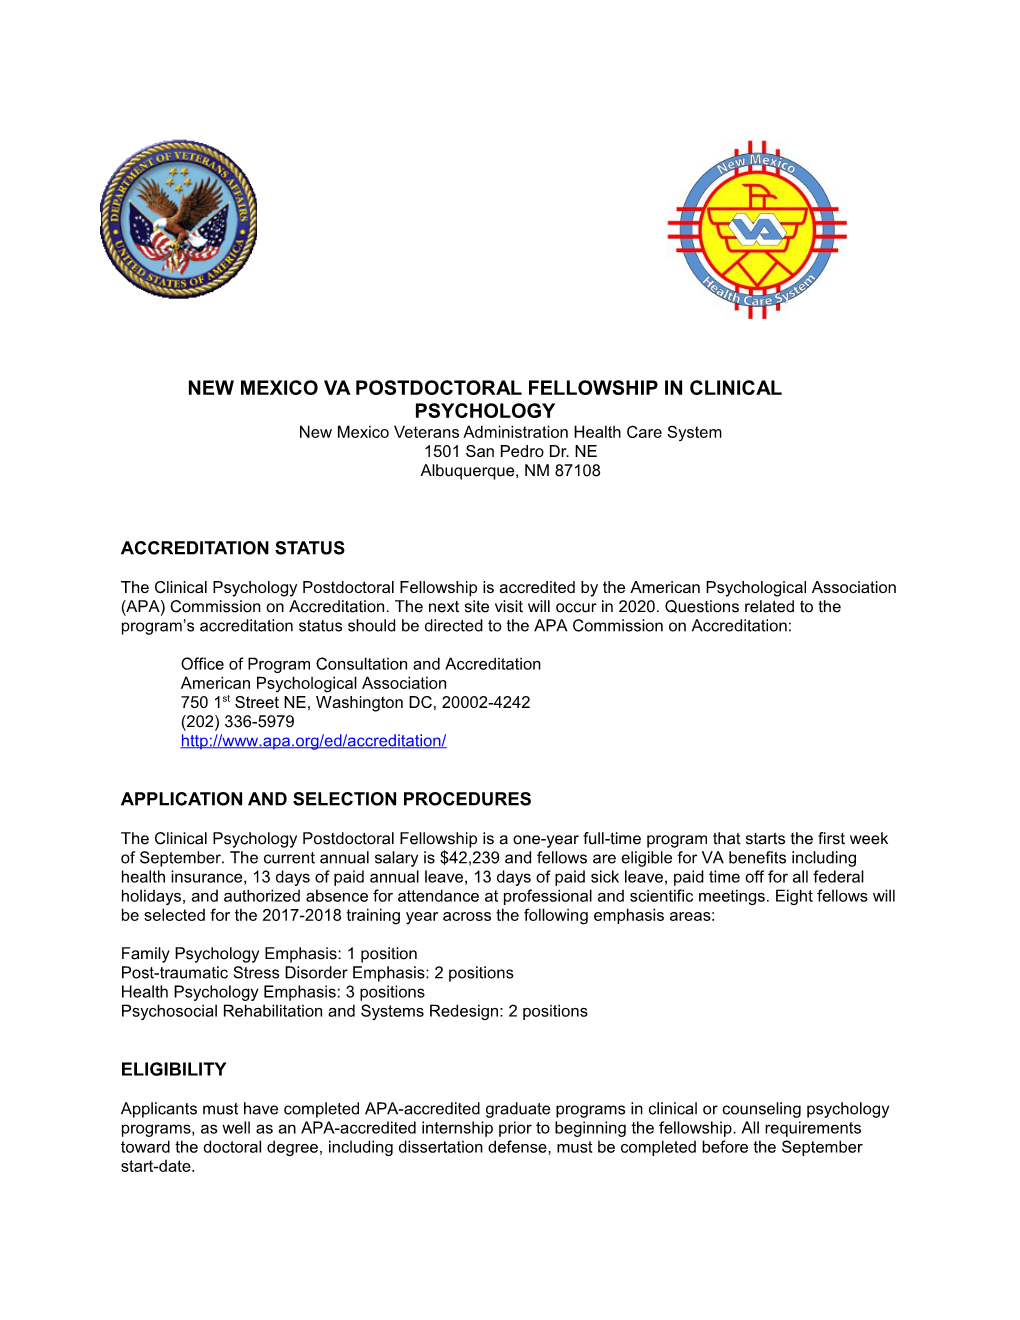 New Mexico VA Postdoctoral Fellowship in Clinical Psychology